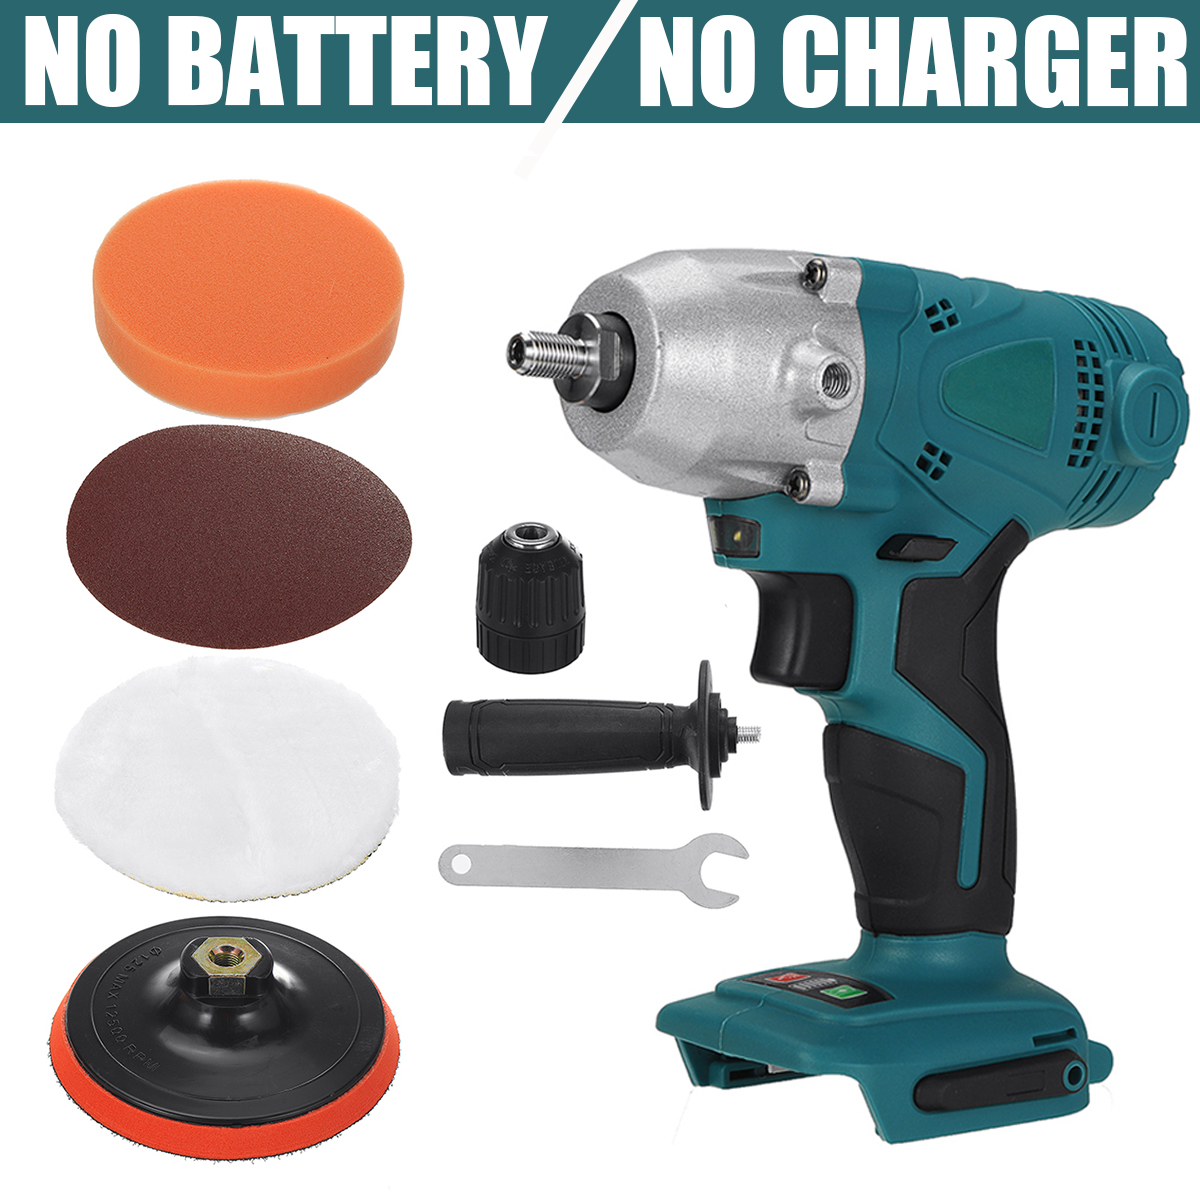 2800rmin-Speed-Regulated-2In1-Cordless-Electric-Drill-Polisher-15Ah-Battery-Car-Repair-Polisher-Dril-1889958-2